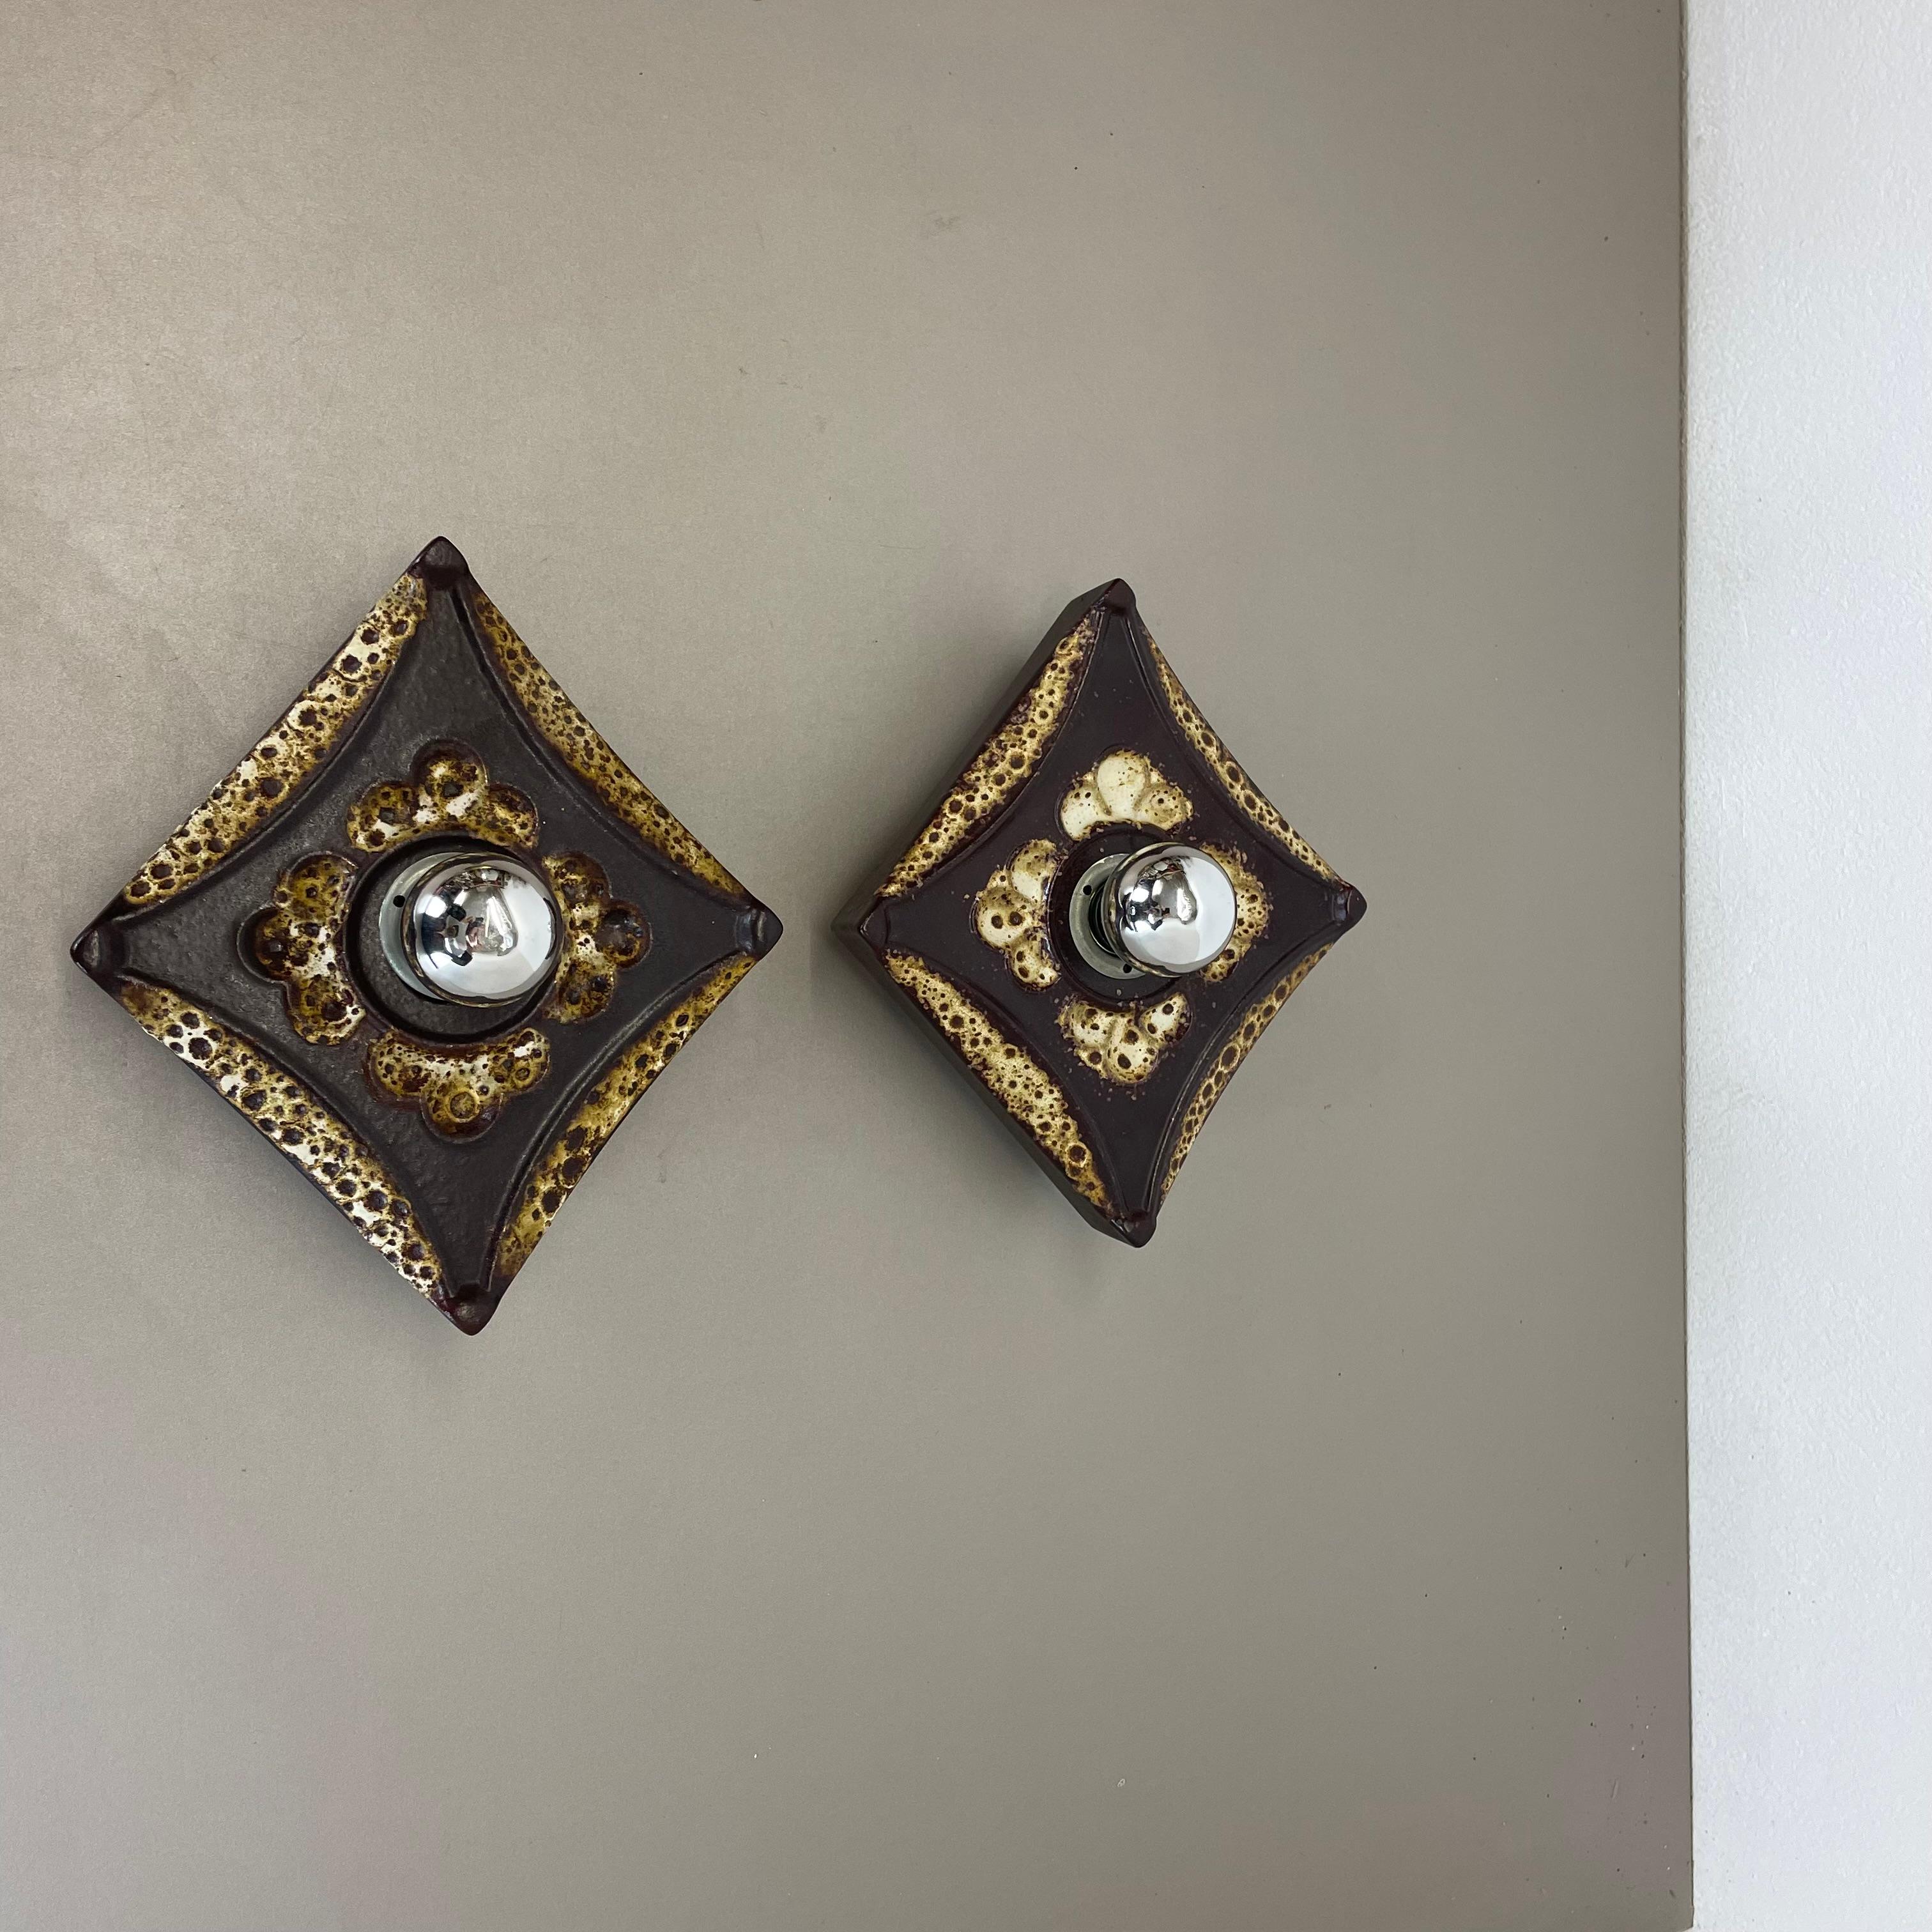 Article:

Wall light sconce set of two


Producer:

Pan Ceramic, Germany.



Origin:

Germany.



Age:

1970s.



Description:

Original 1970s modernist German wall light made of ceramic in fat lava optic. This super rare set of ftwo walls light was